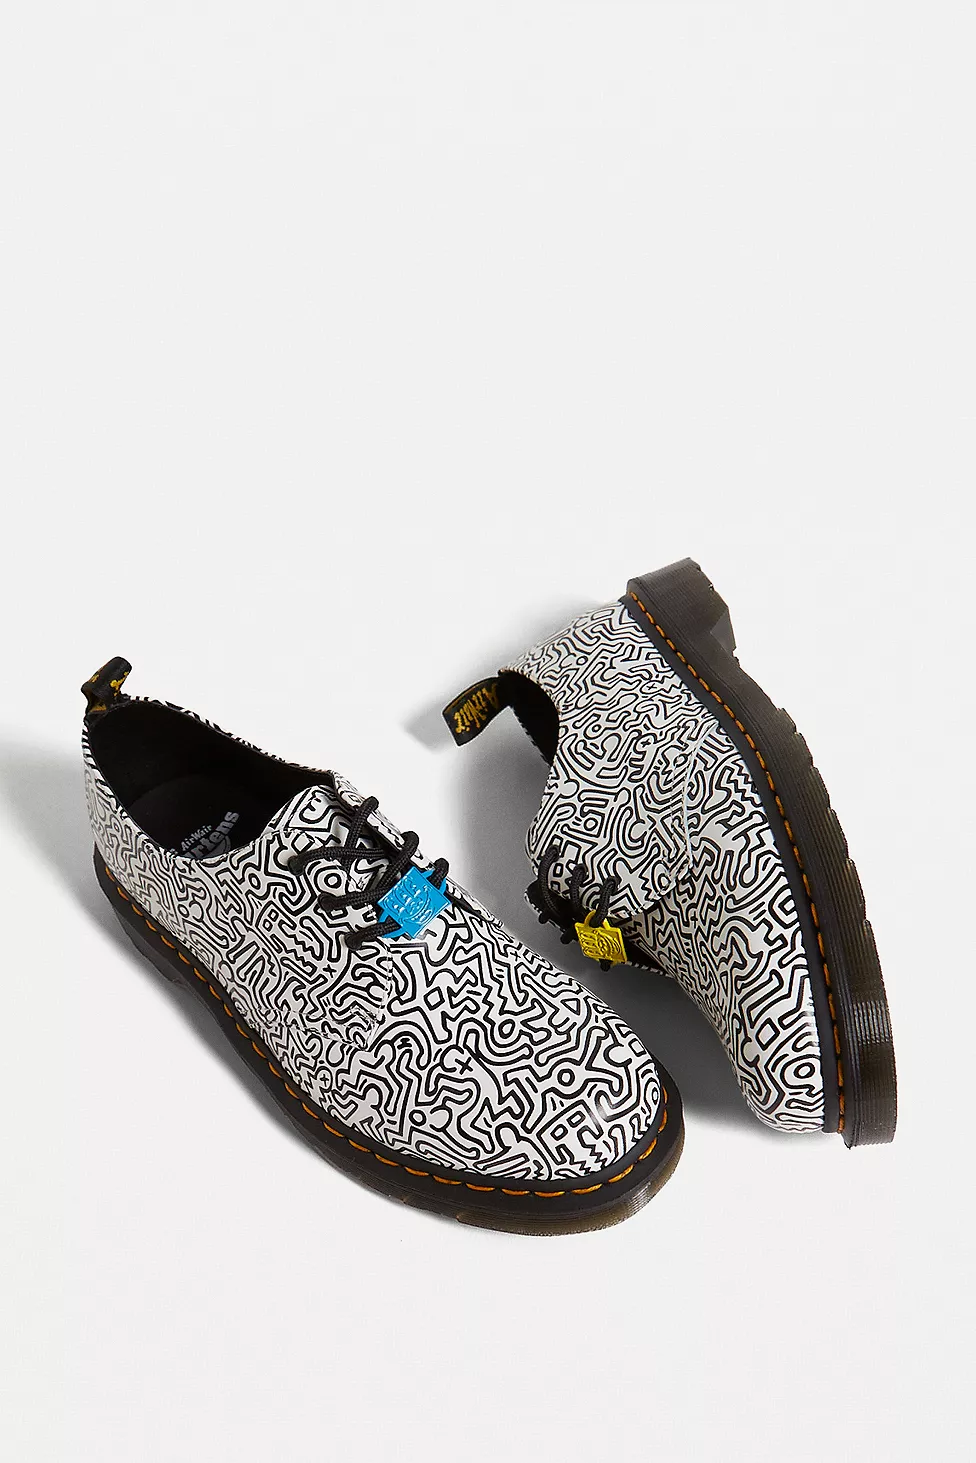 urbanoutfitters.com | Dr. Martens x Keith Haring